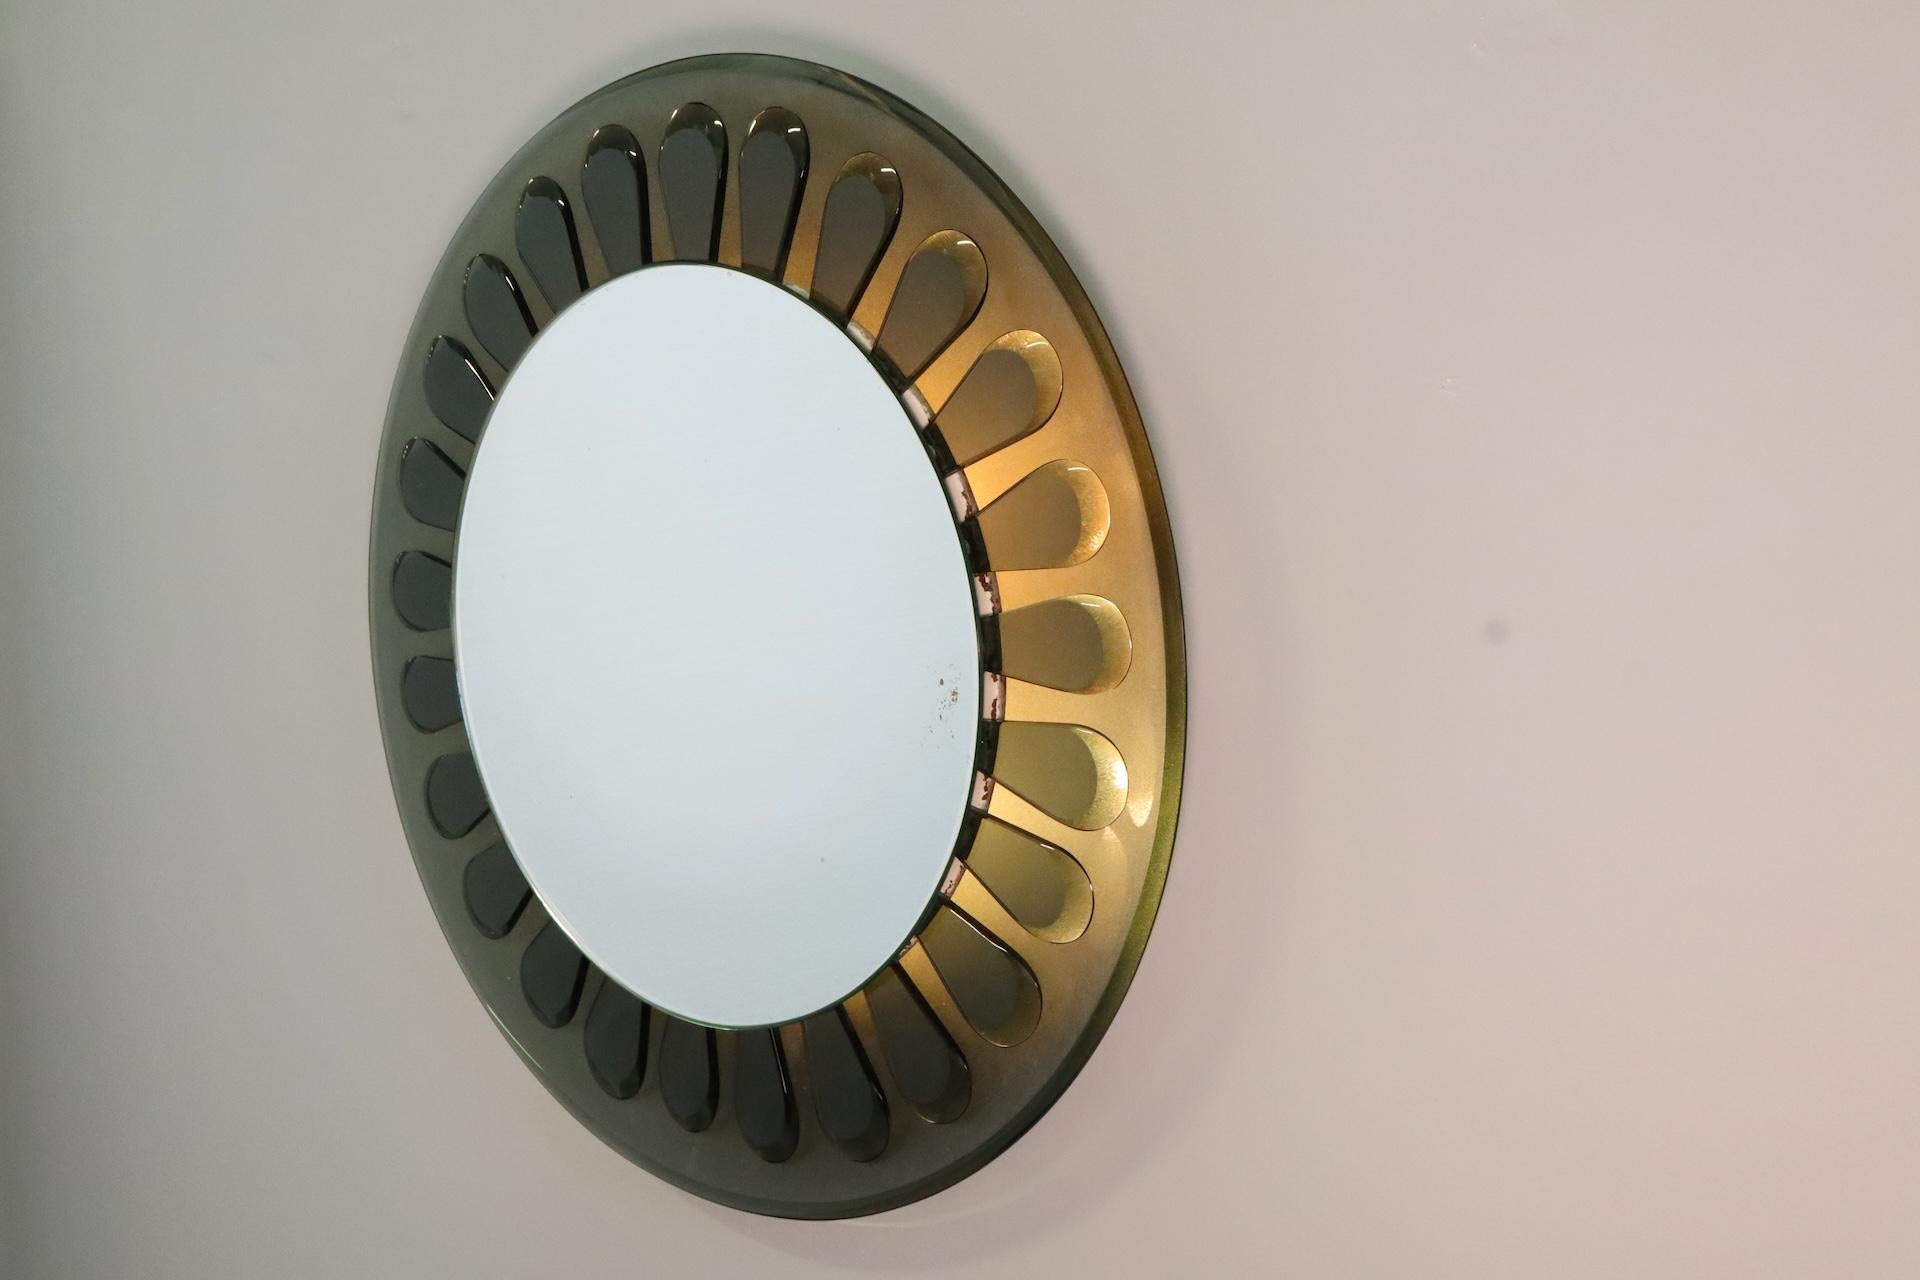 Flower-shaped wall mirror by Max Ingrand for Fontana Arte Italia 1964 For Sale 9